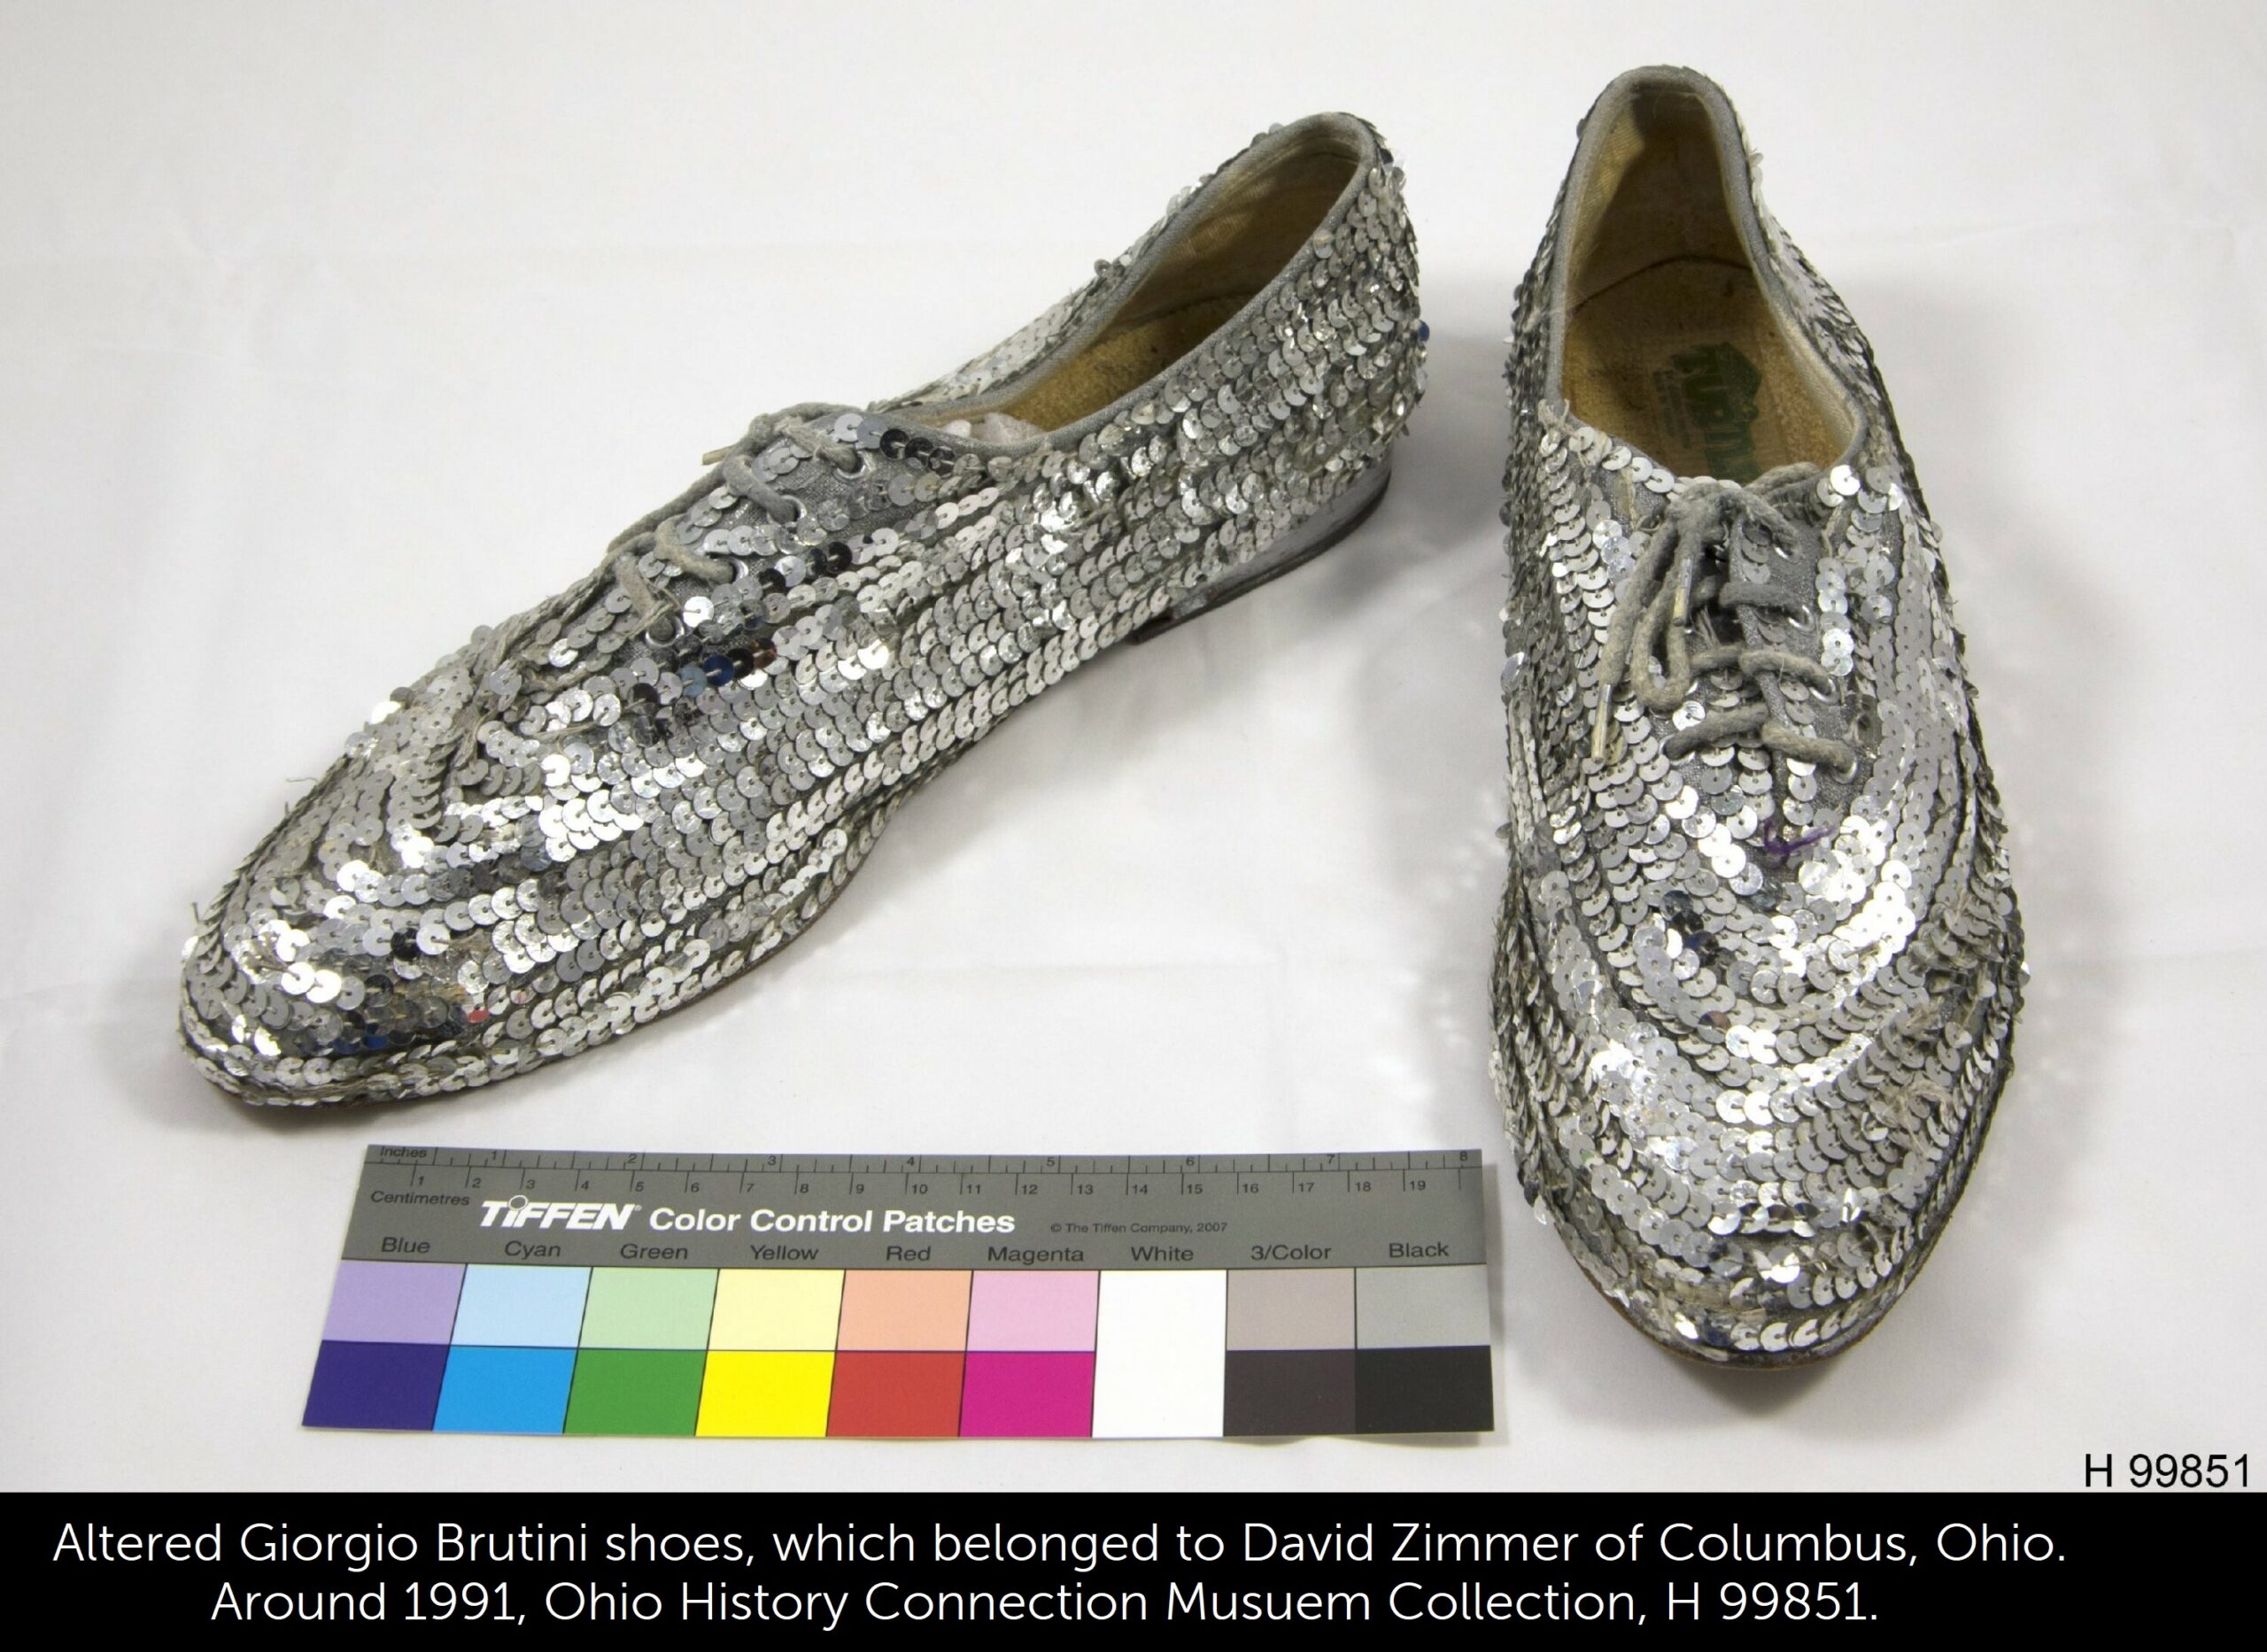 A photo of altered Giorgio Brutini shoes that belonged to David Zimmer